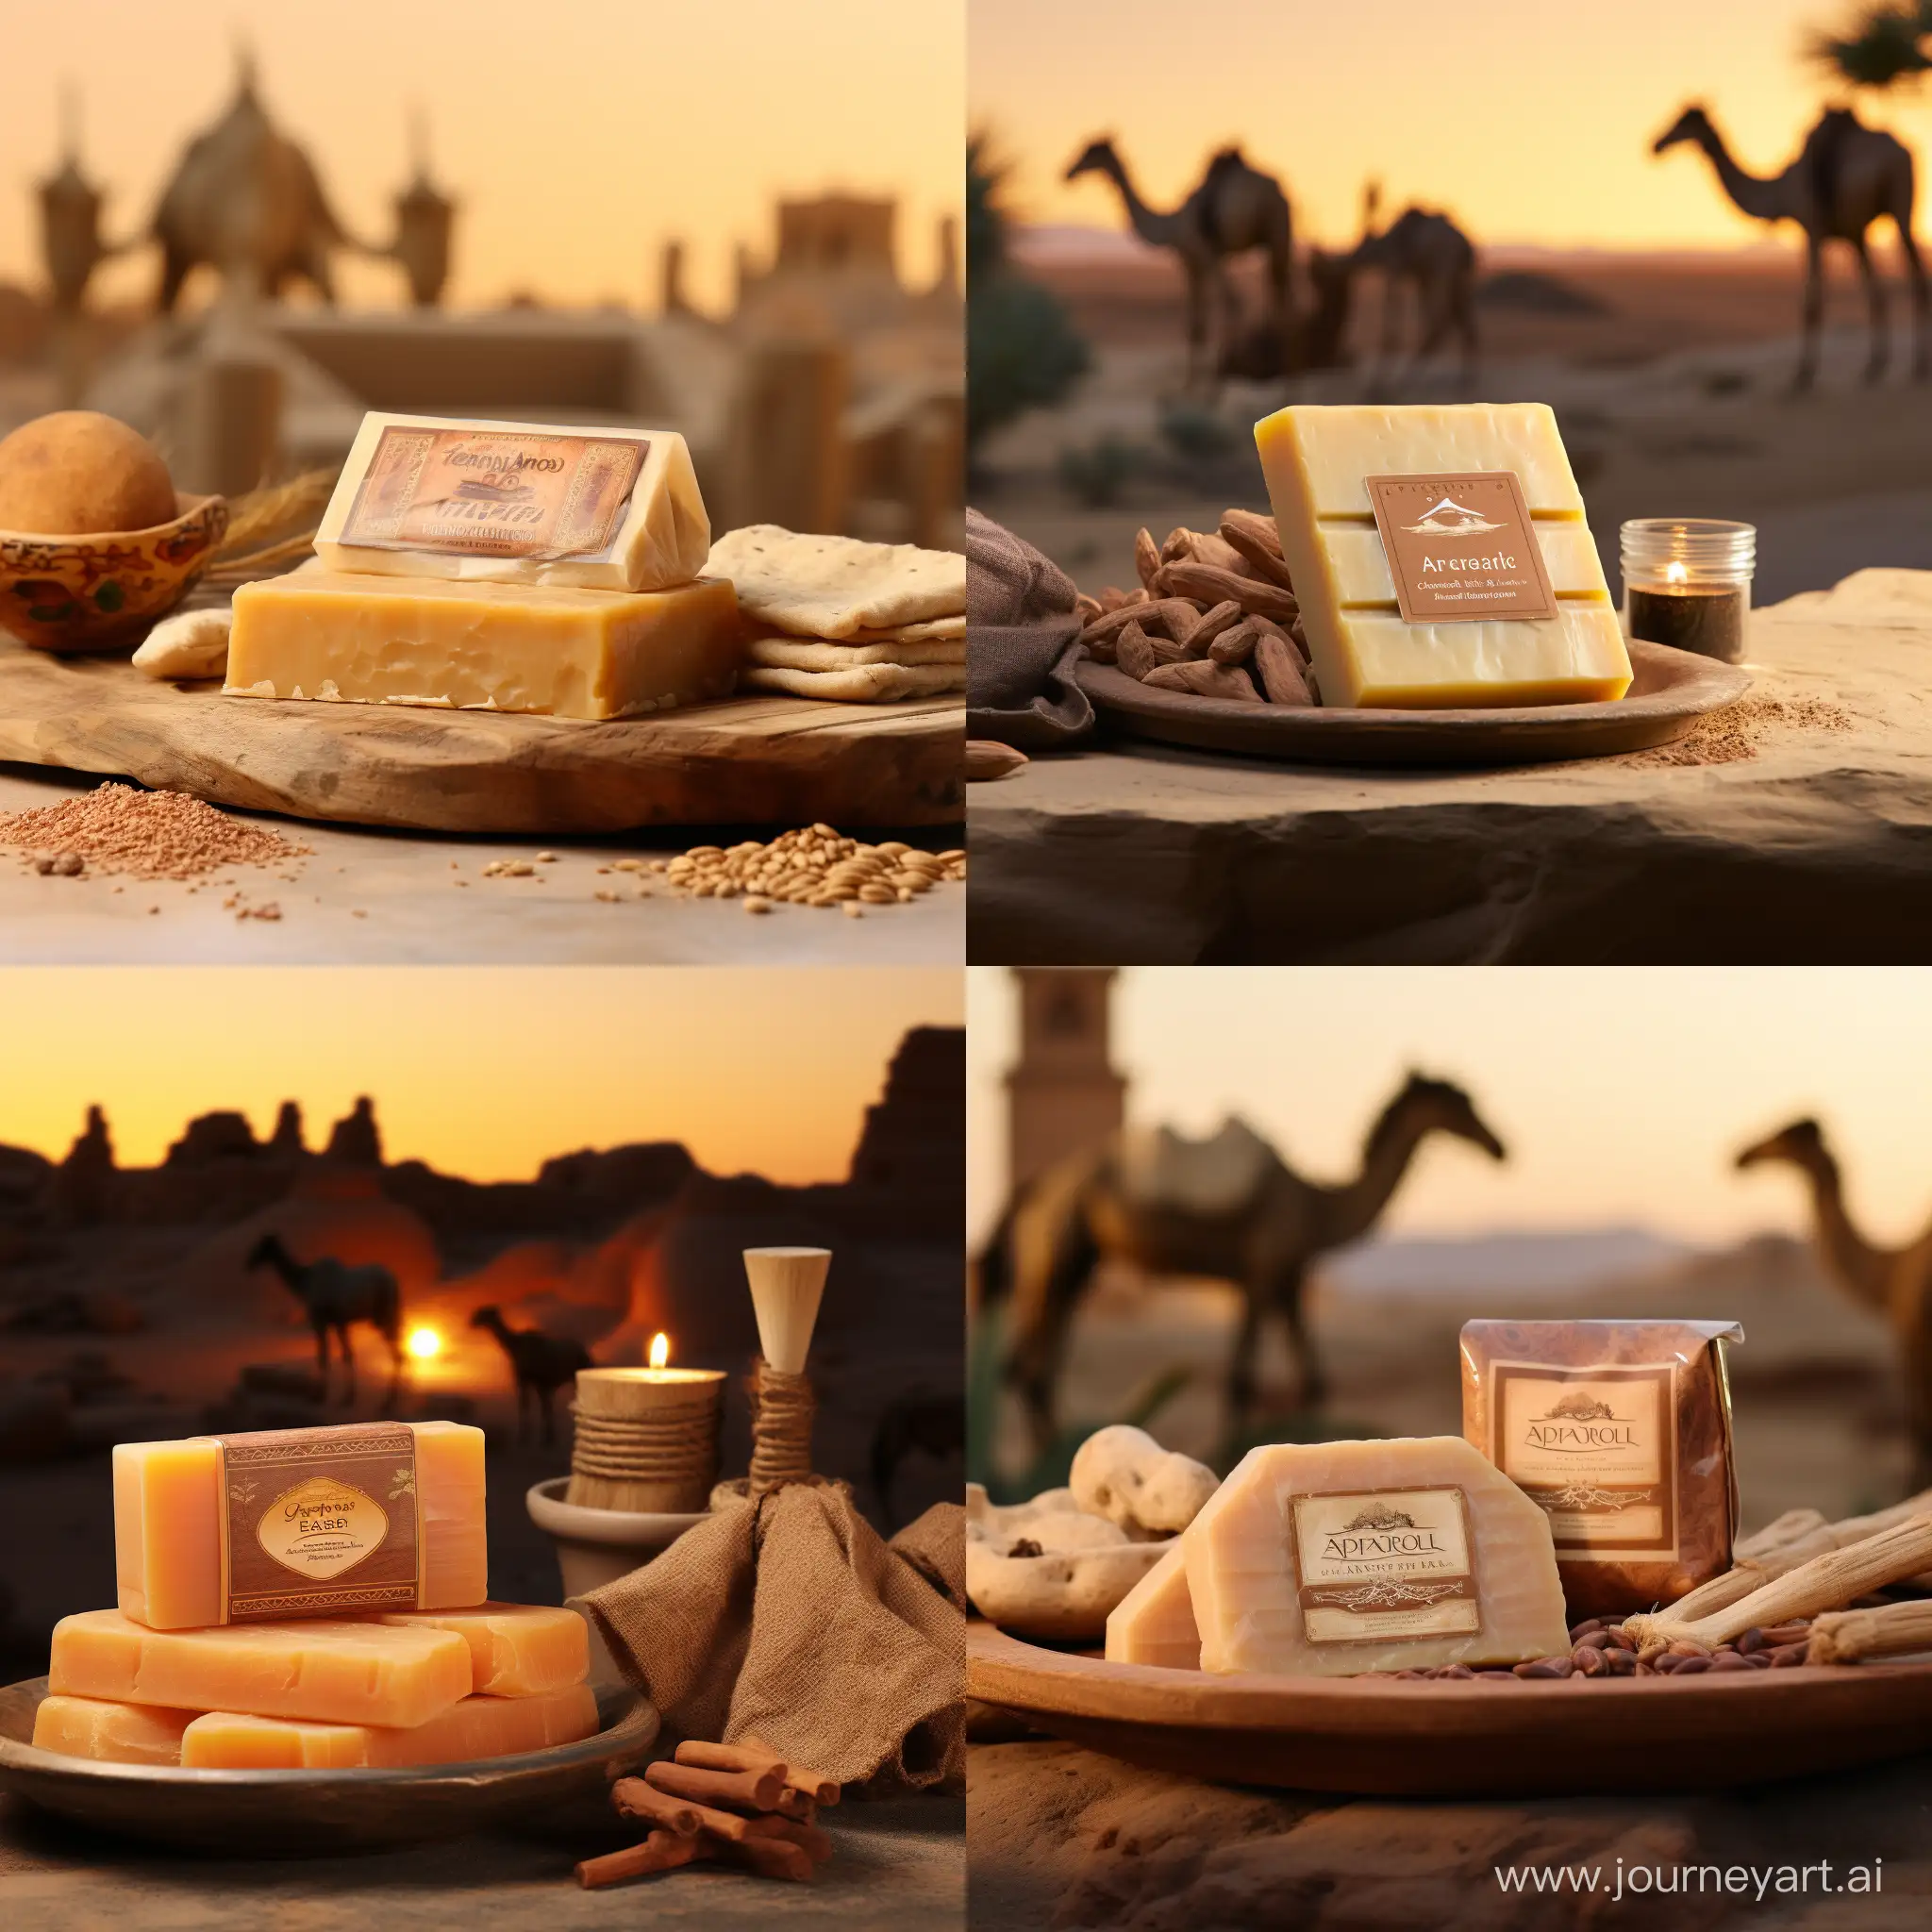 Aleppo Soap from Syria, product  marketing objective, desert background